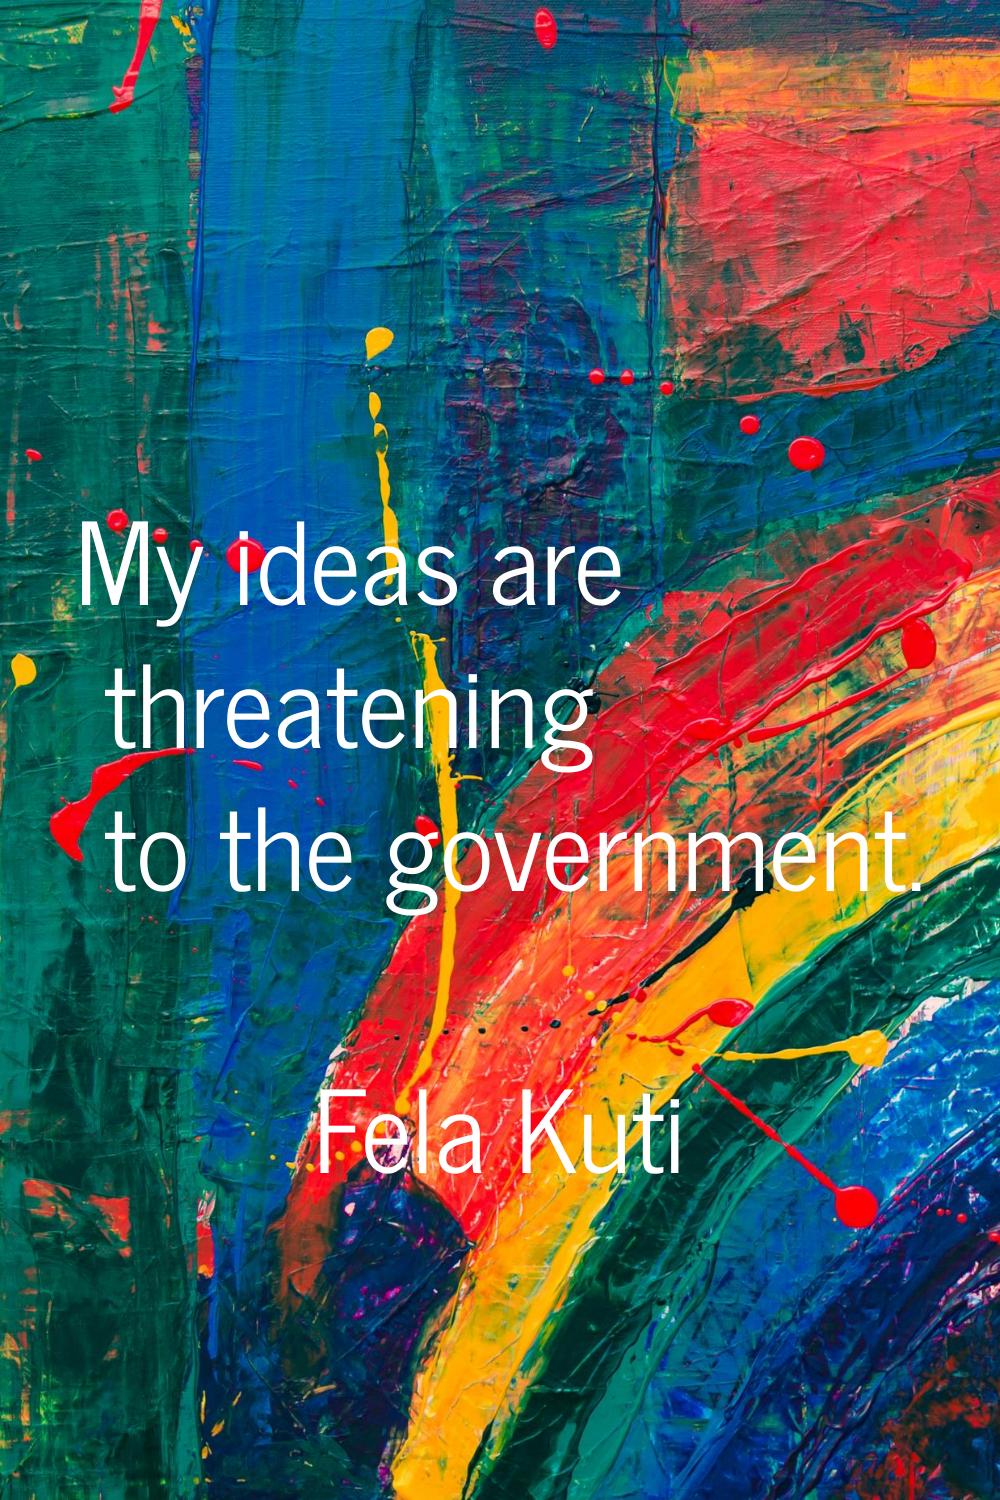 My ideas are threatening to the government.